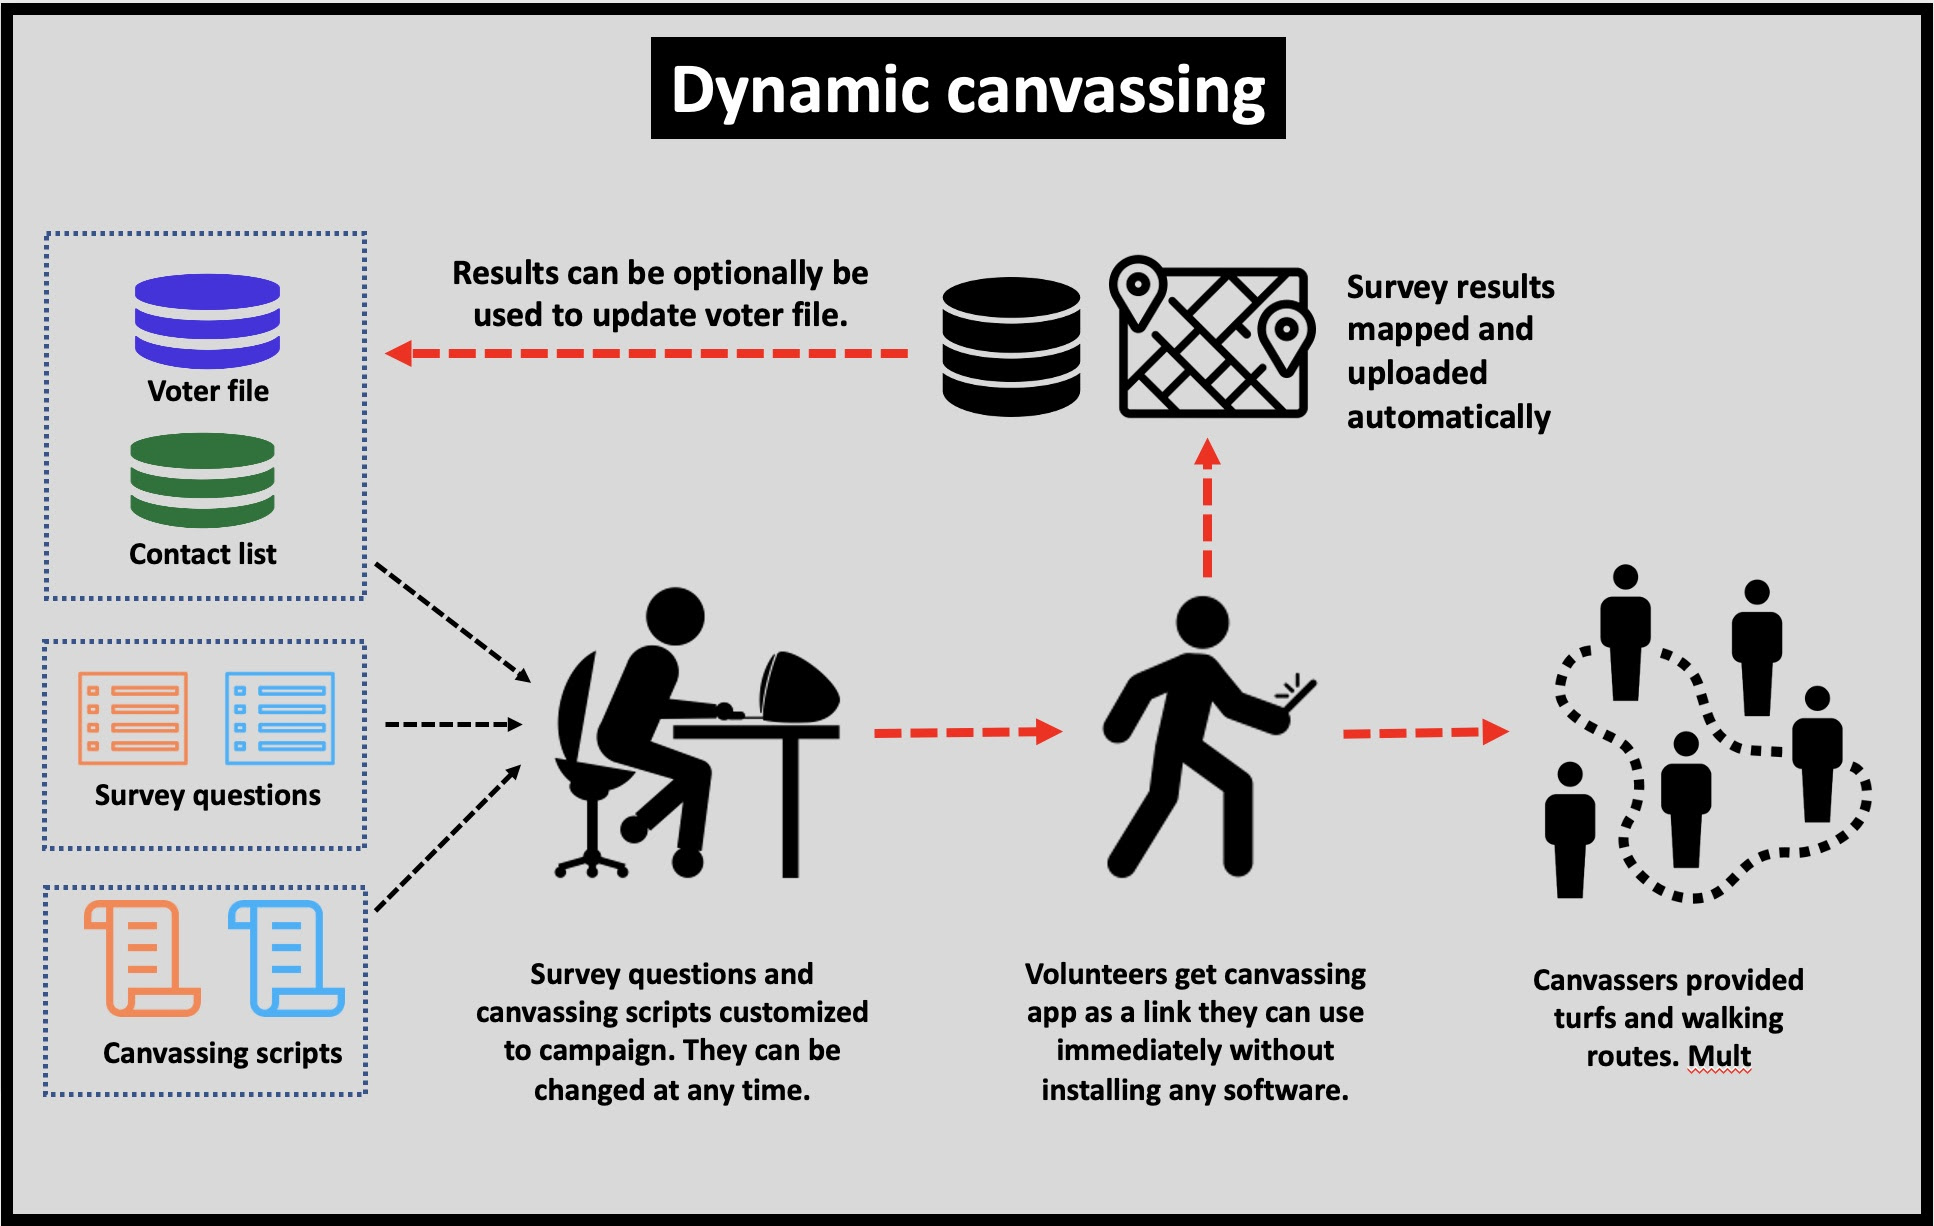 Dynamic canvassing works with the voter file or any other contact list. Along with choice of survey questions and canvassing scripts.